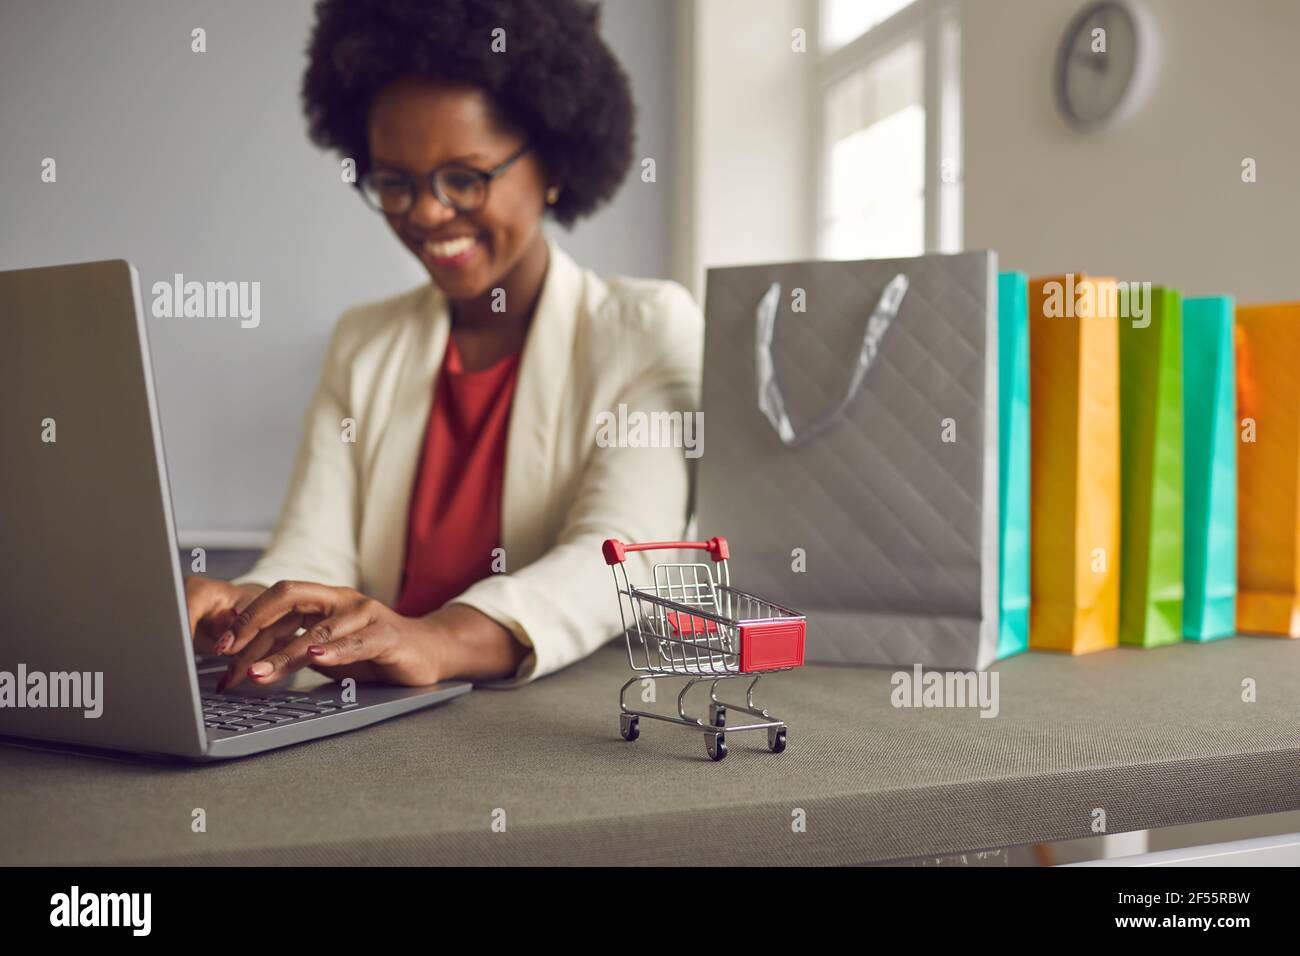 Toy grocery cart standing on a table near shopping bags and next to a woman shopping online. Stock Photo